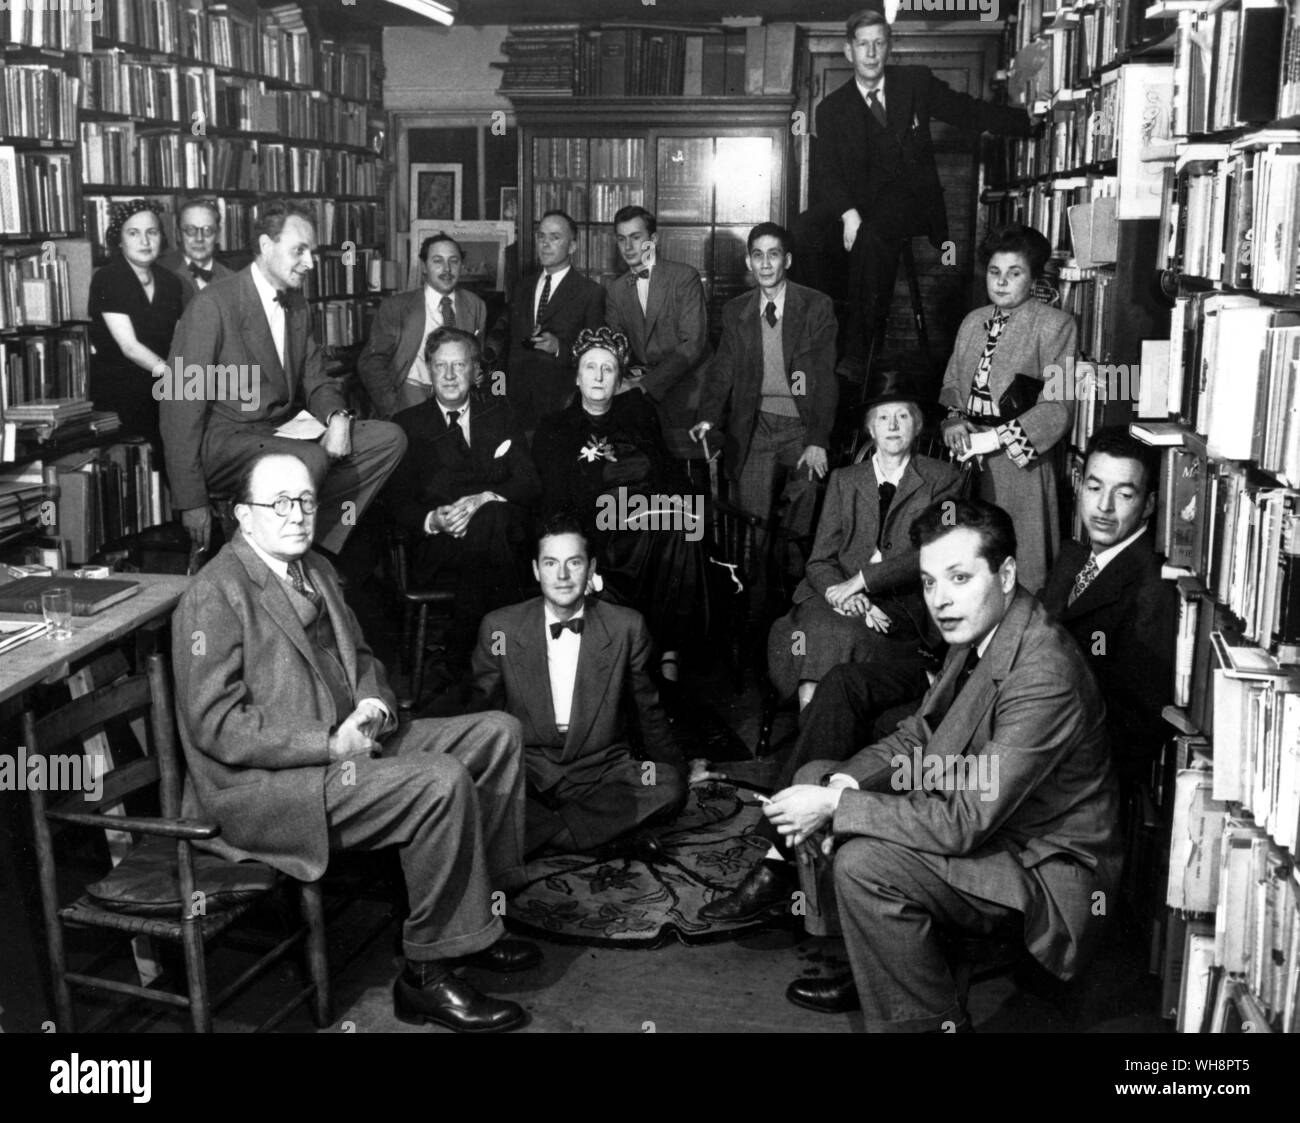 A reception at the Gotham Book Mart for Edith and Osbert Sitwell, seated in the centre on 9 November 1948 Auden is sitting on ladder and clockwise from him Elizabeth Bishop, Marianne Moore, Delmore Schwartz, Randall Jarrell, Charles Henri Ford, William Rose Benet, Stephen Spender, Marya Zaturenska, Horace Gregory, Tennessee Williams, Richard Eberhart, Gore Vidal and Jose Garcia Villa Stock Photo